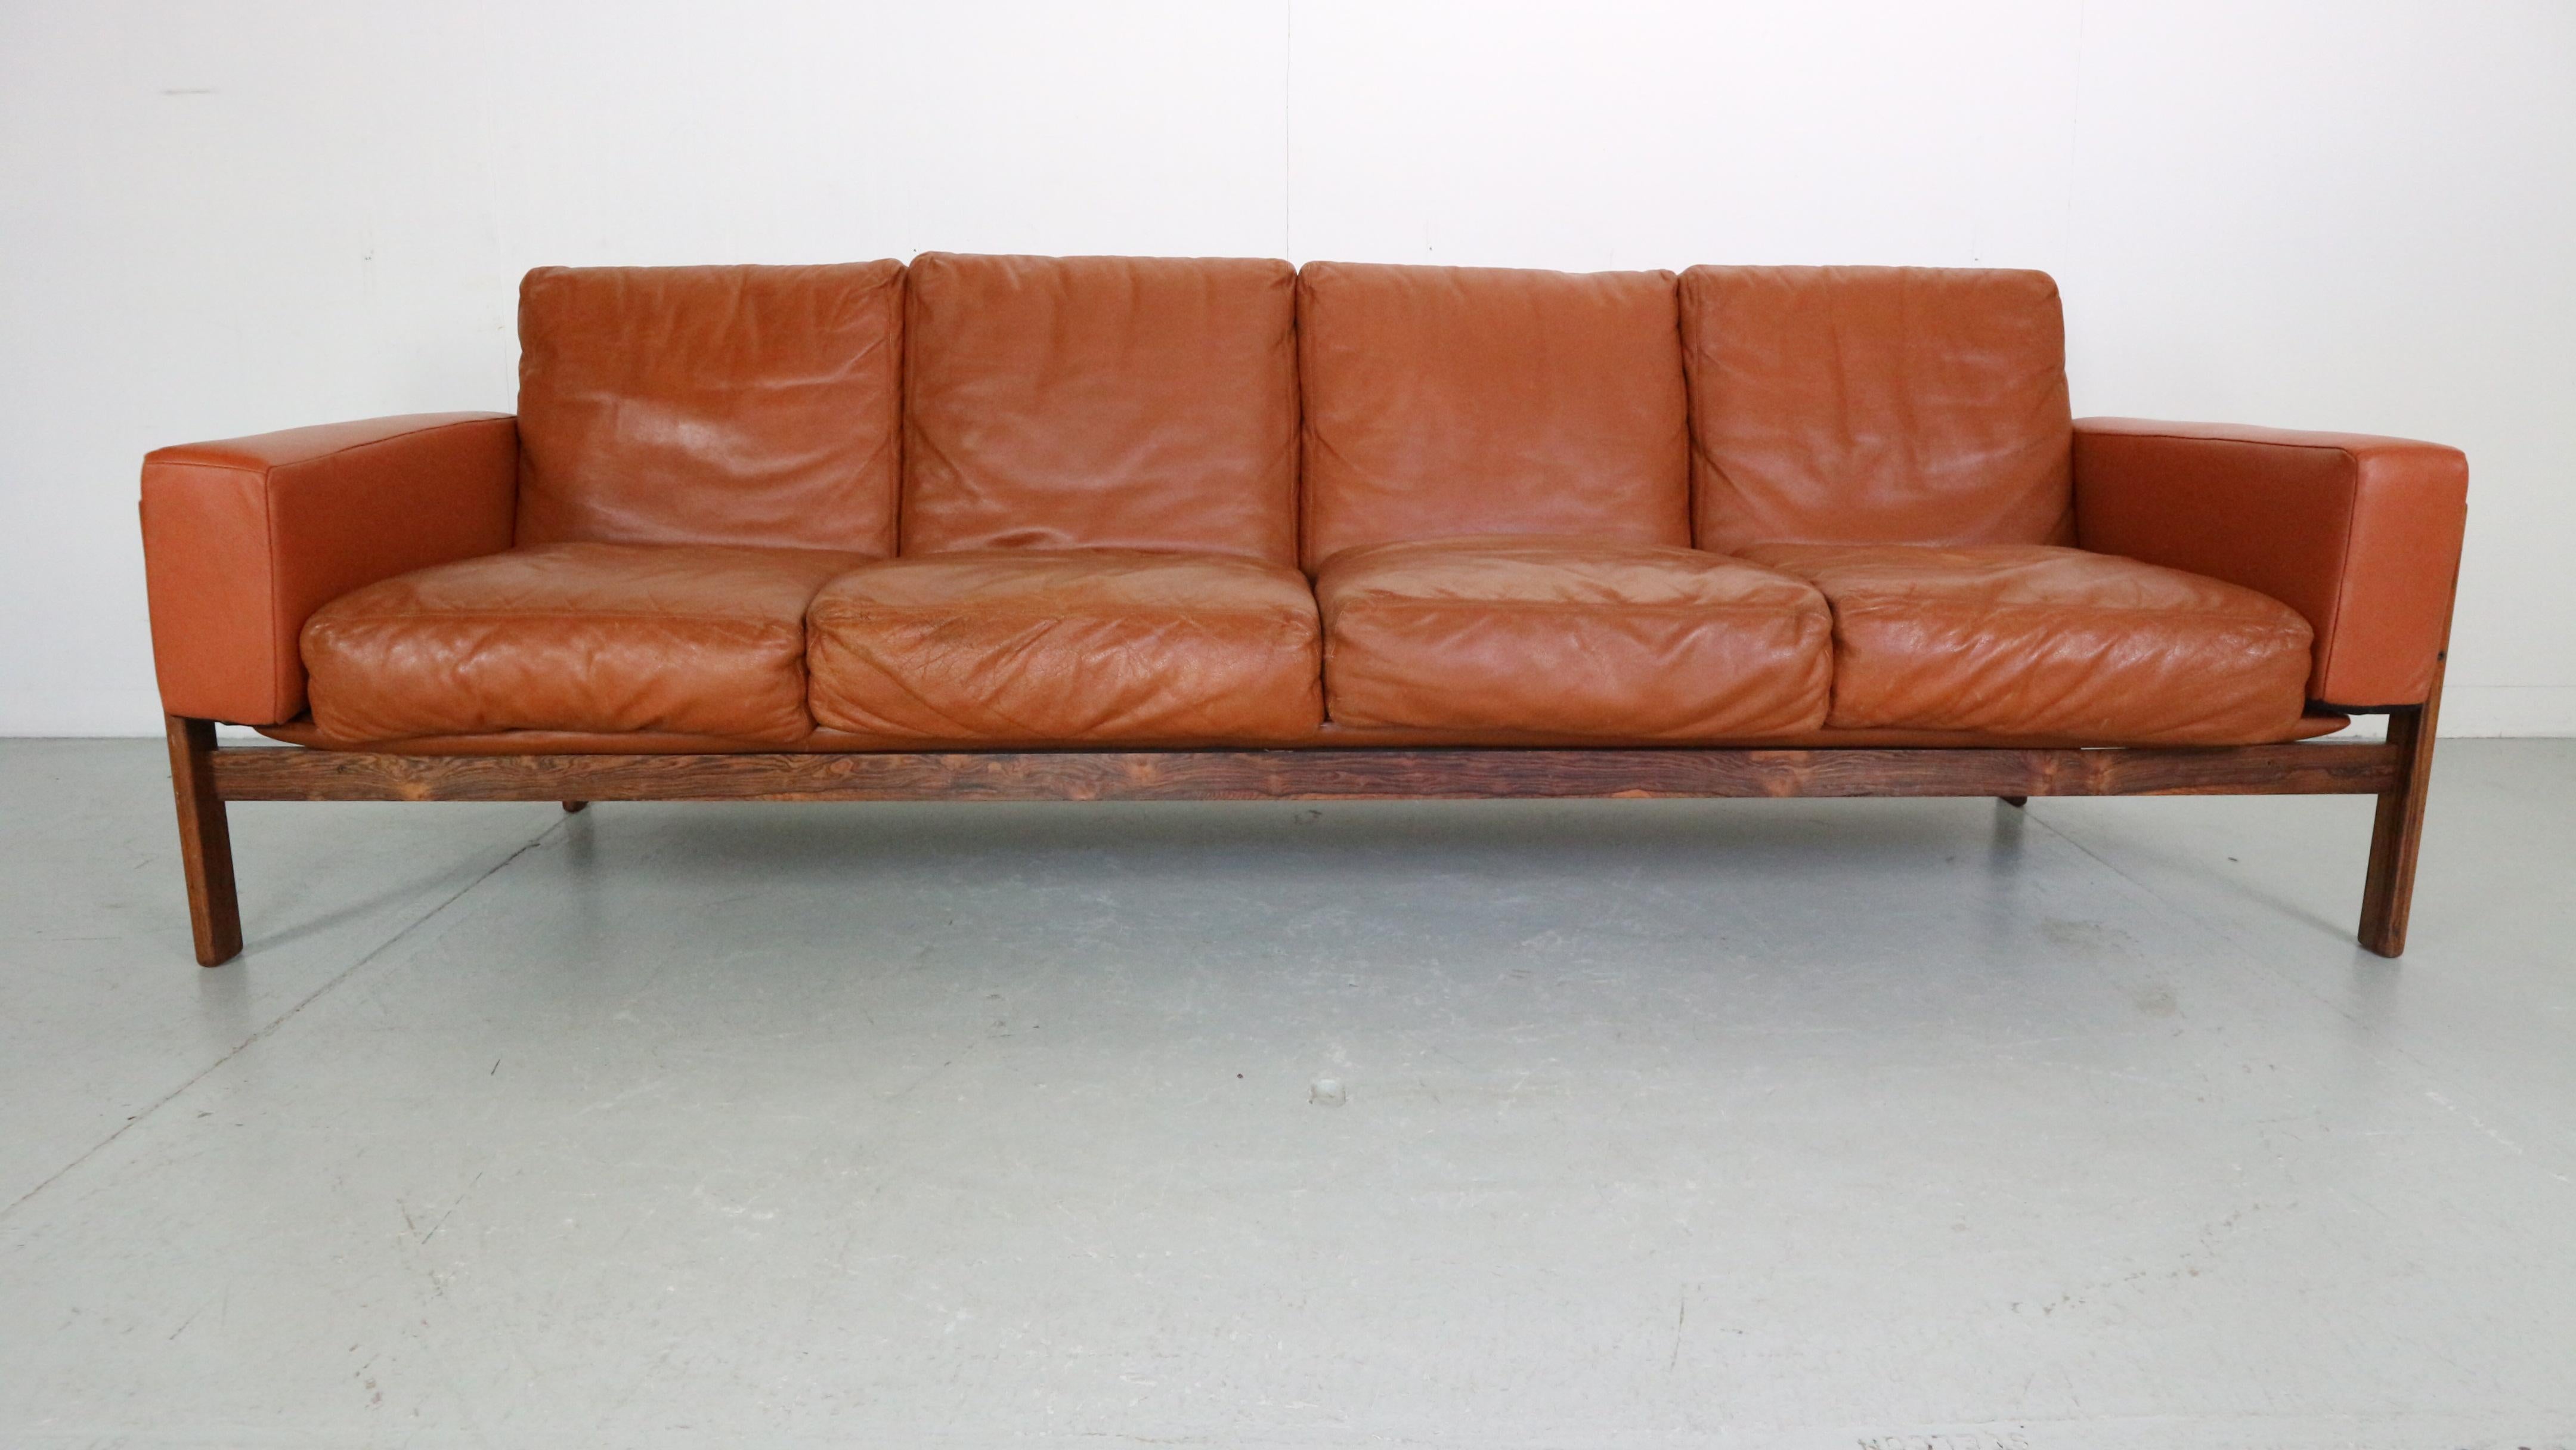 Rare vintage Norwegian design 4-seater wood and leather sofa, model Flueline. Designed by Sven Ivar Dysthe for Dokka Møbler in the 1960s.

This iconic design piece has eight loose cushions, and two armrest cushions in gorgeous cognac/camel-colored